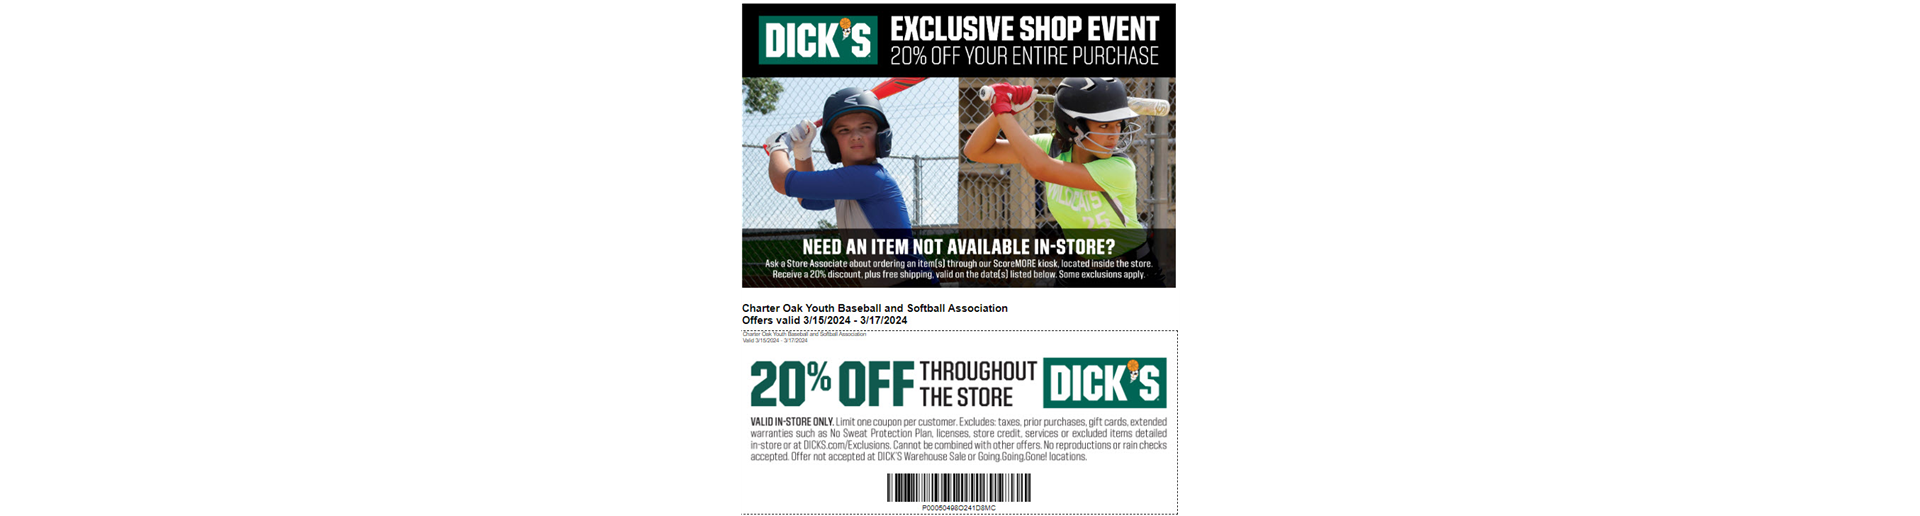 DICK's  COUPON  3/15 - 3/17  ONLY ! ! ! 